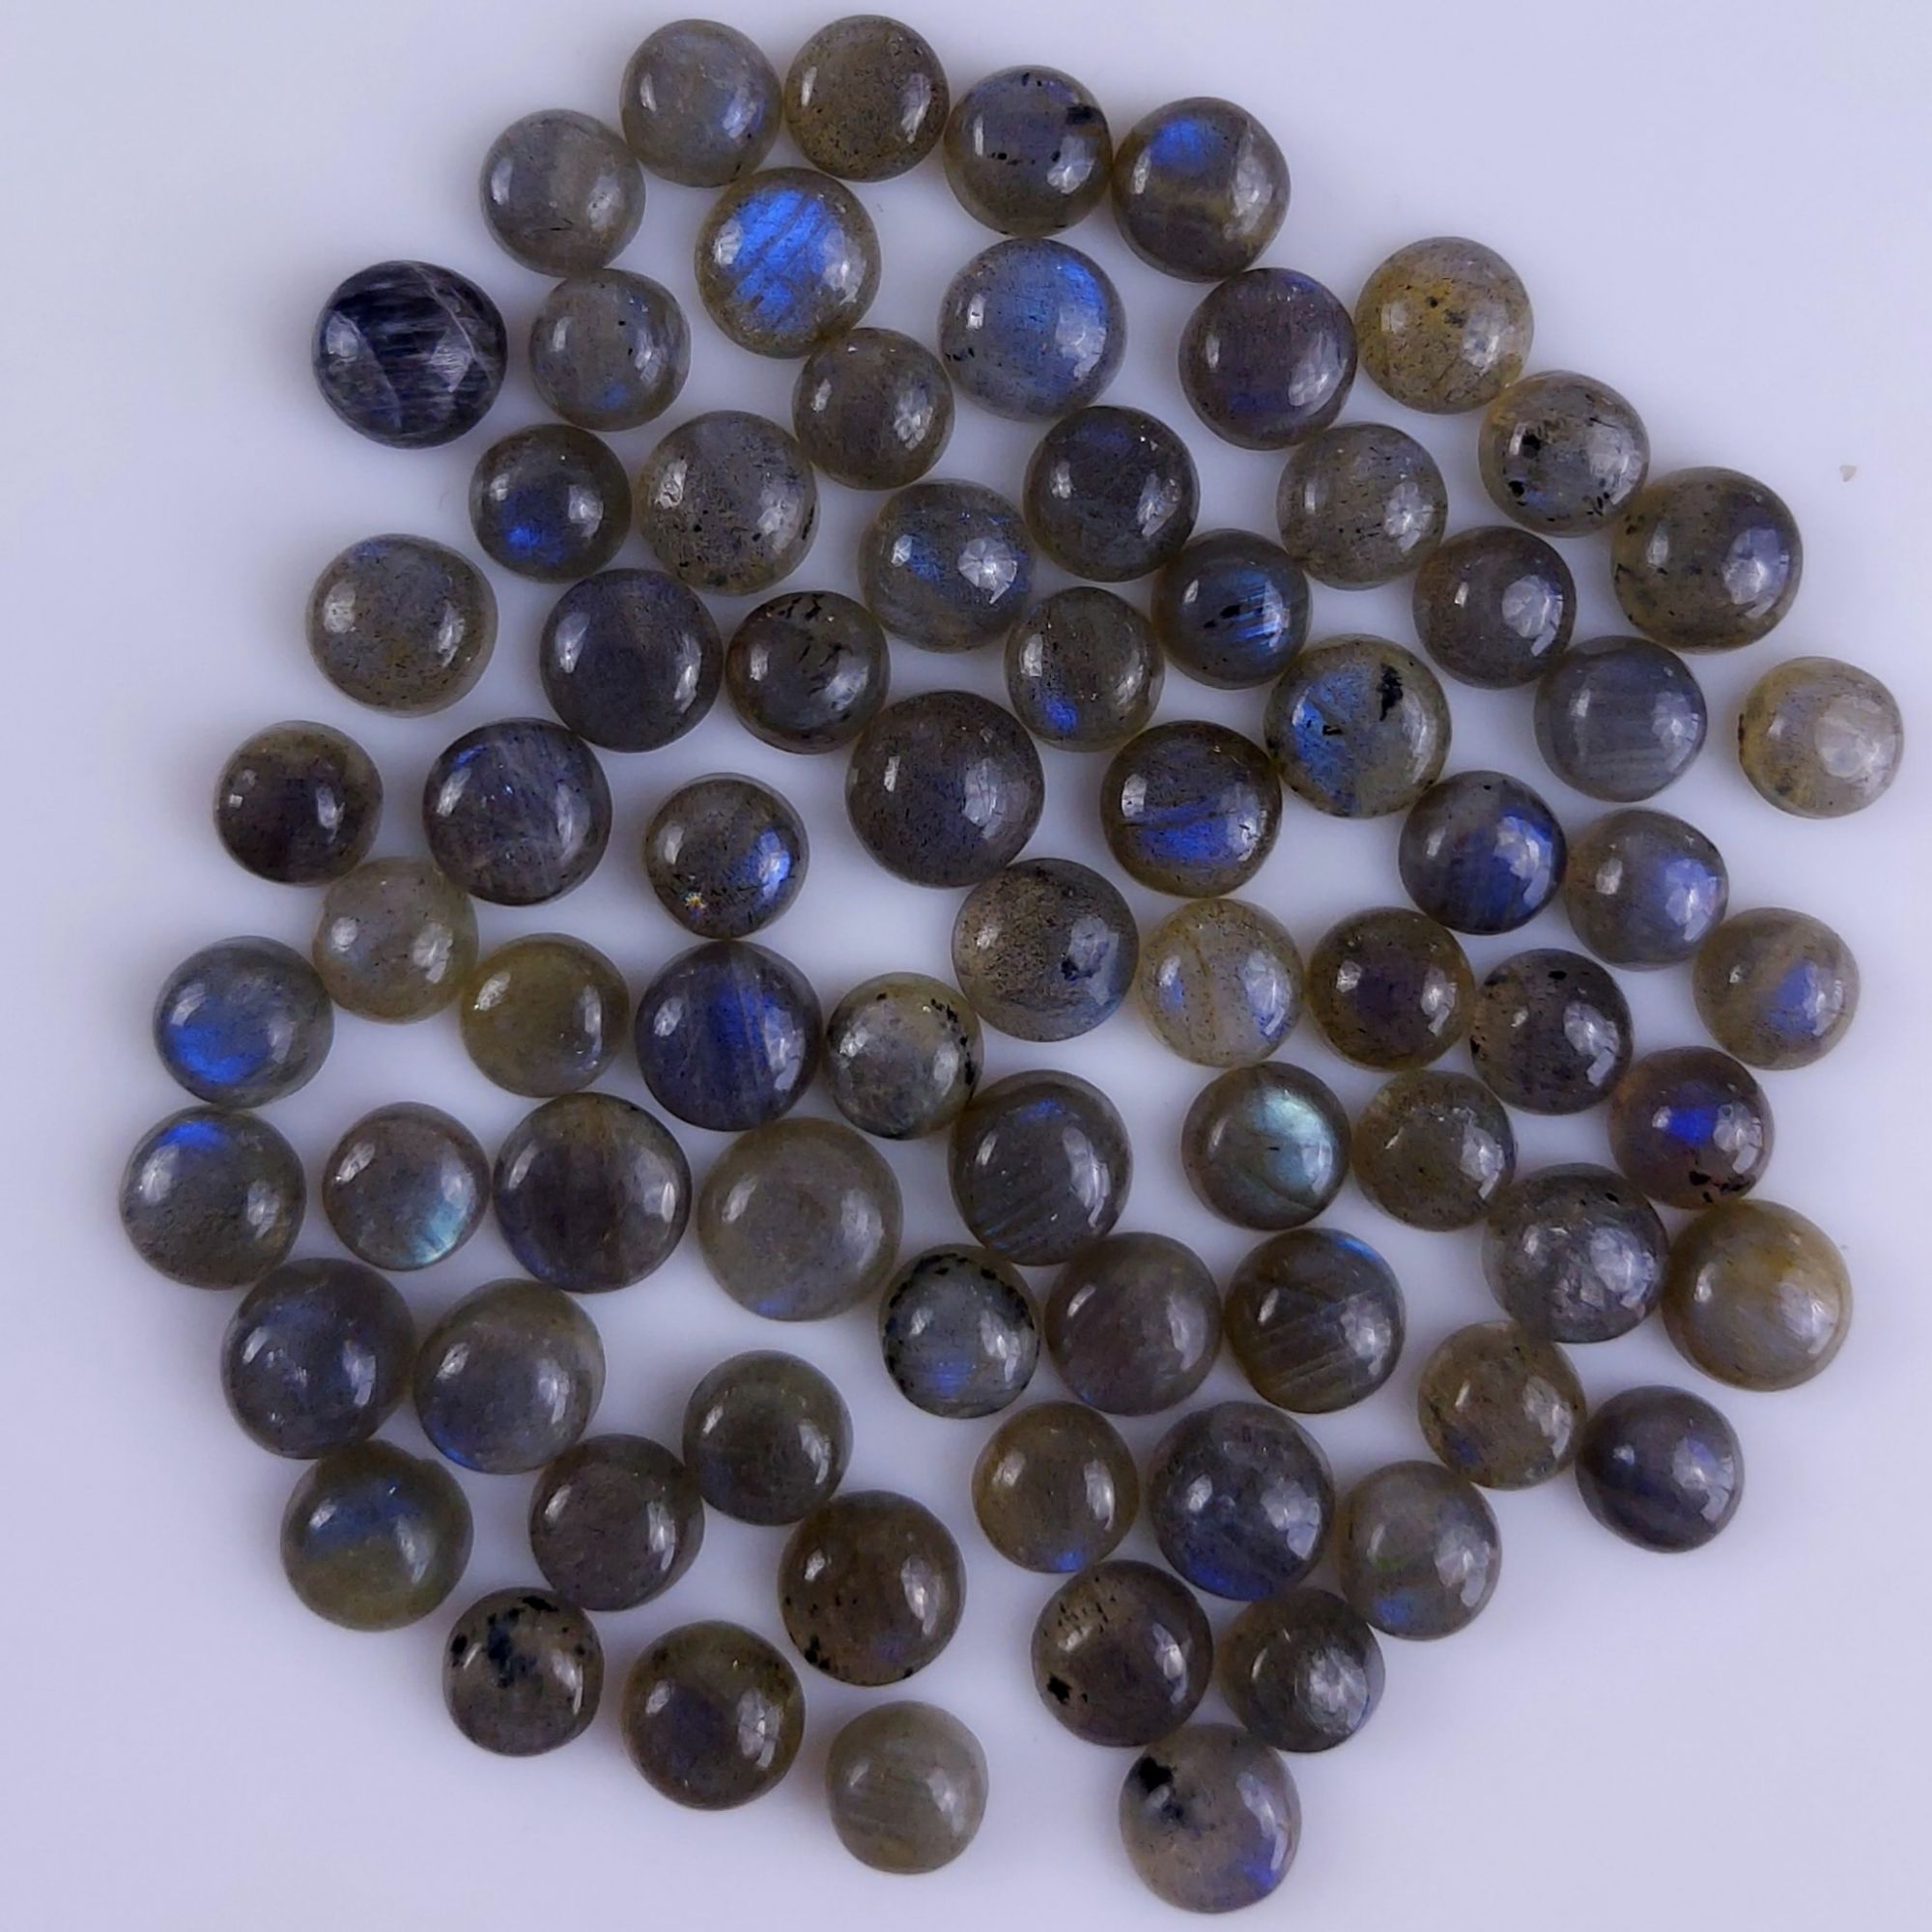 75Pcs 193Cts Natural Blue Labradorite Calibrated Cabochon Round Shape Gemstone Lot For Jewelry Making 7x7mm#758